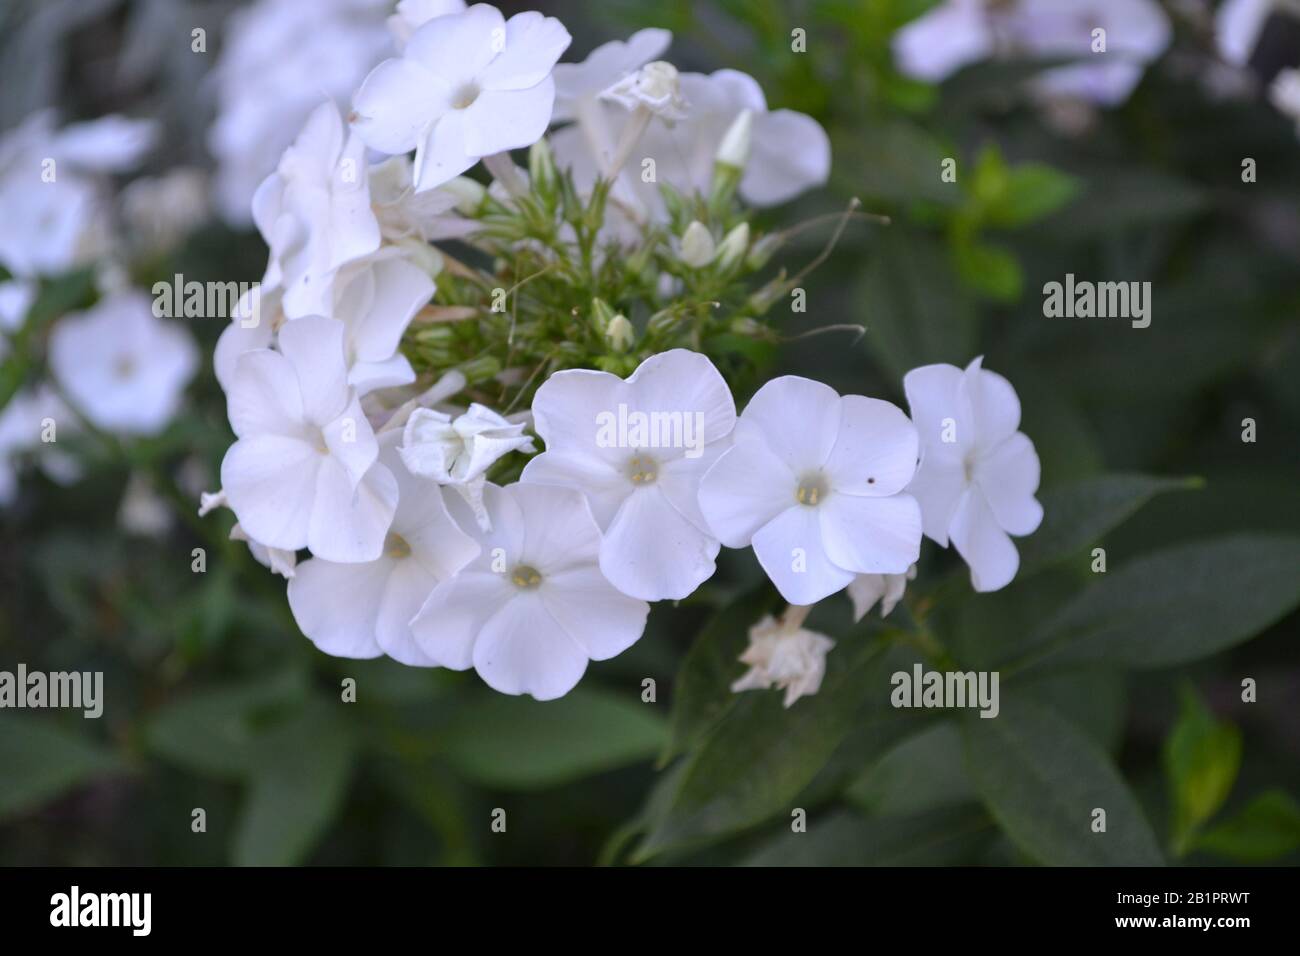 Phlox. Polemoniaceae. Growing flowers. Flowerbed. Garden. Floriculture. White inflorescences. Beautiful flowers. Green leaves. High bushes. Summer day Stock Photo